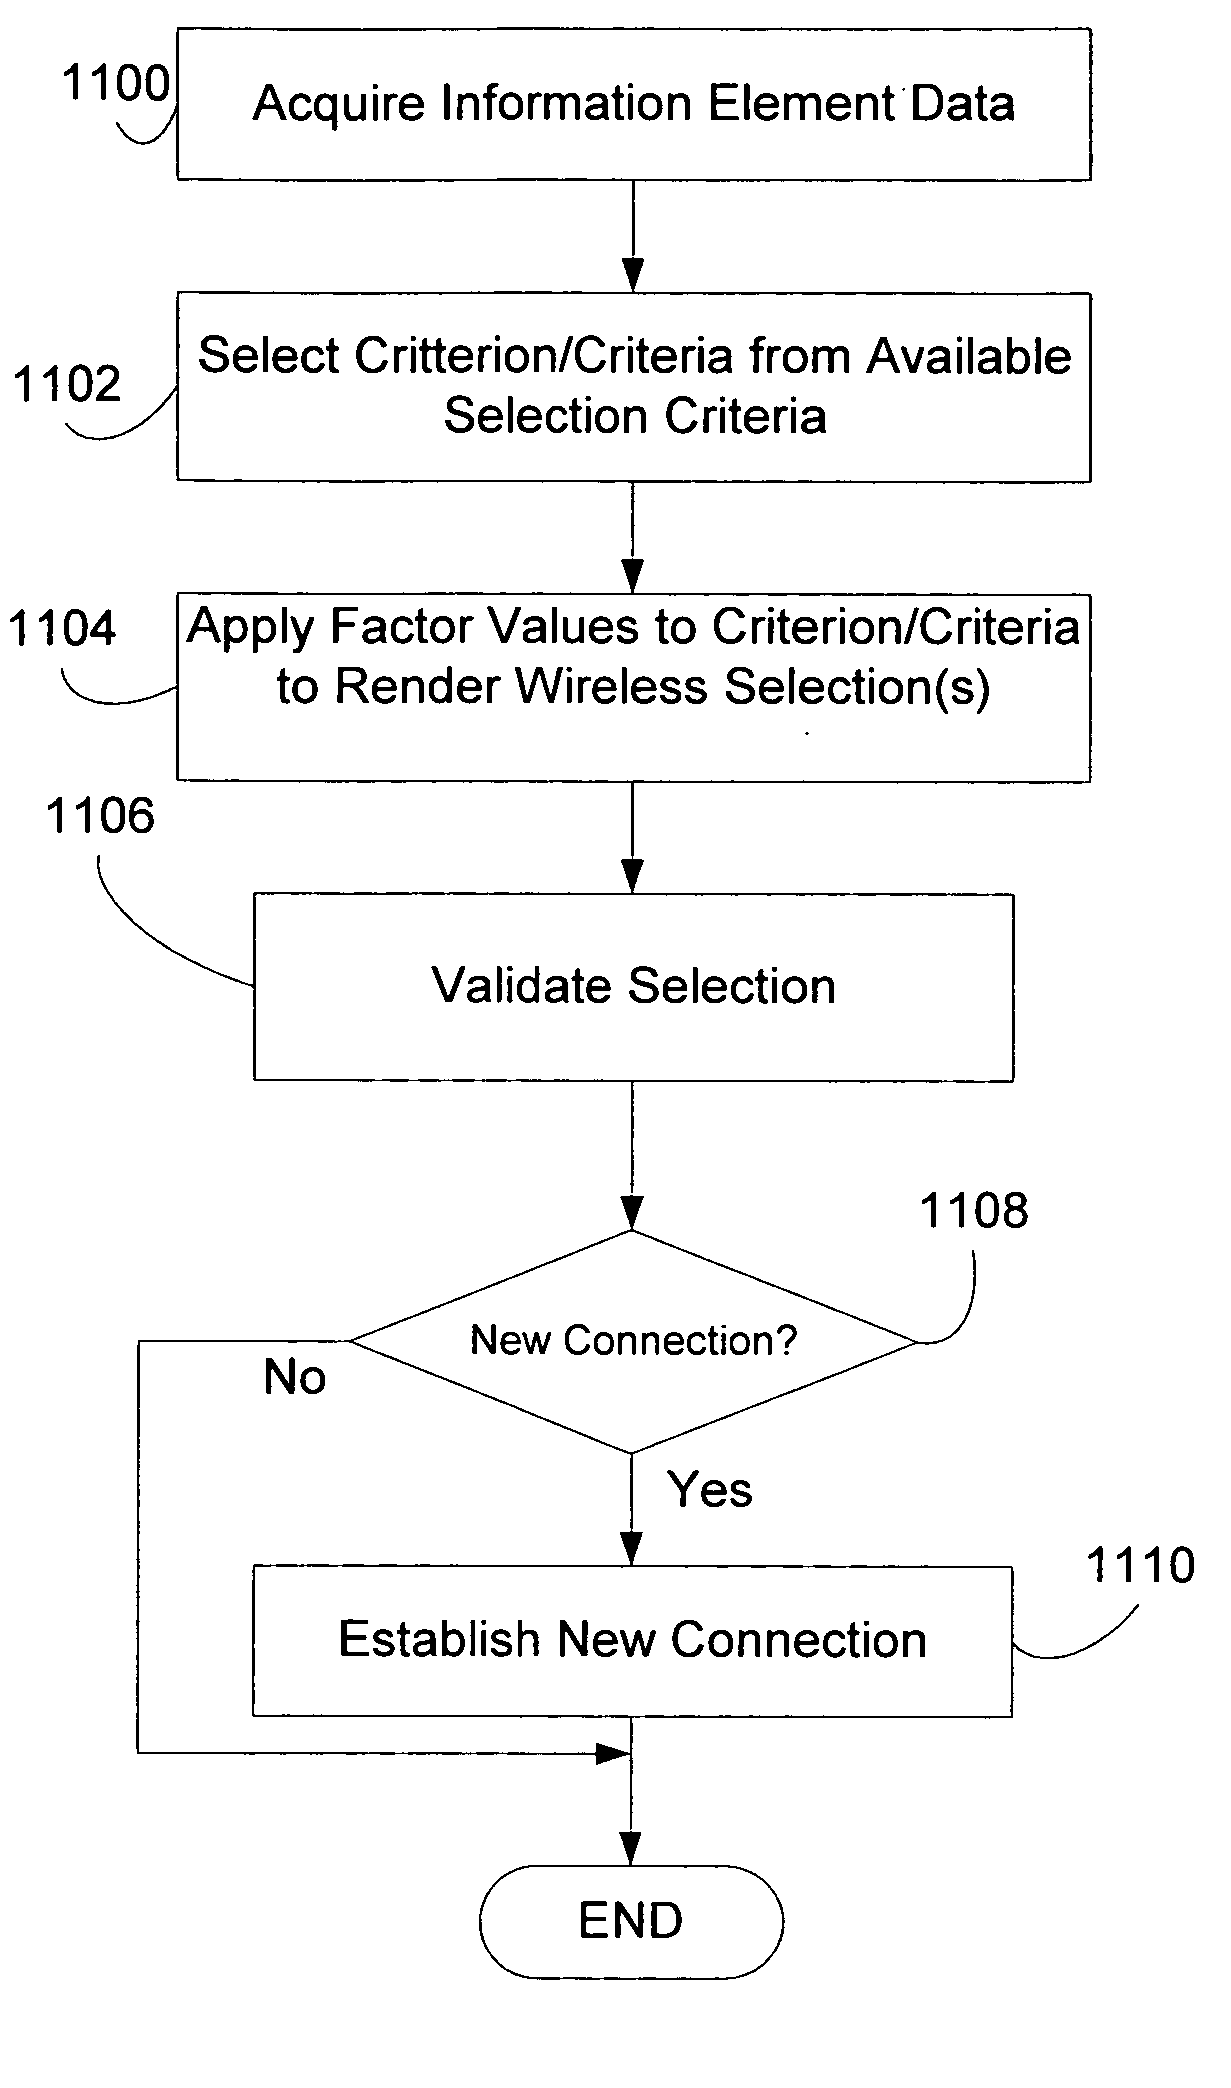 Selecting a wireless networking technology on a device capable of carrying out wireless network communications via multiple wireless technologies